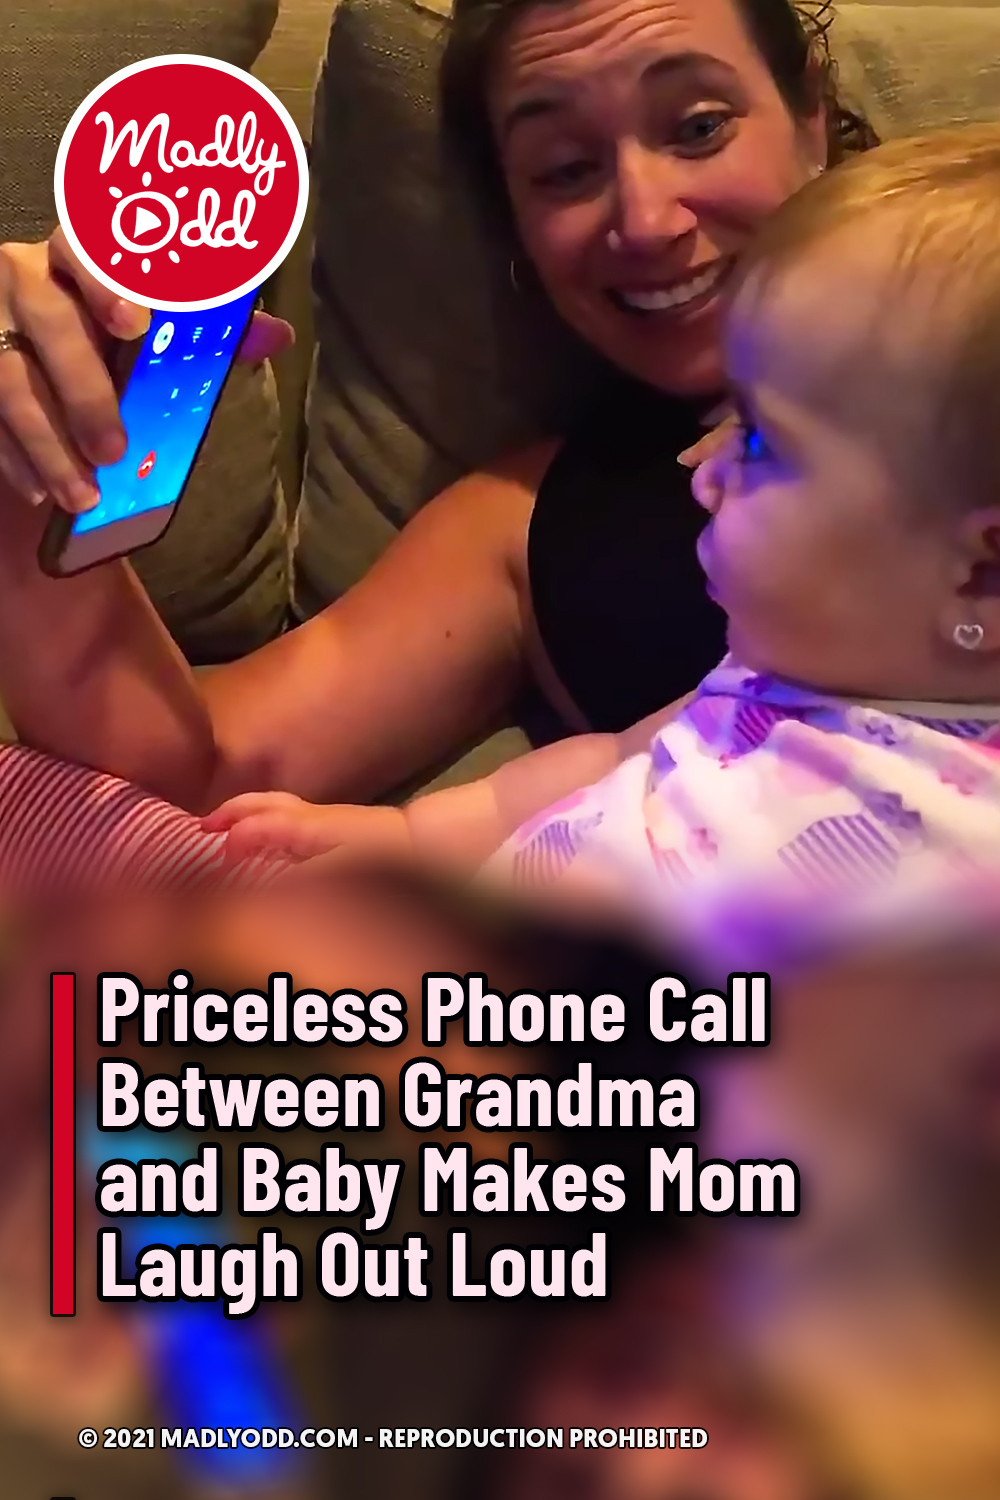 Priceless Phone Call Between Grandma and Baby Makes Mom Laugh Out Loud